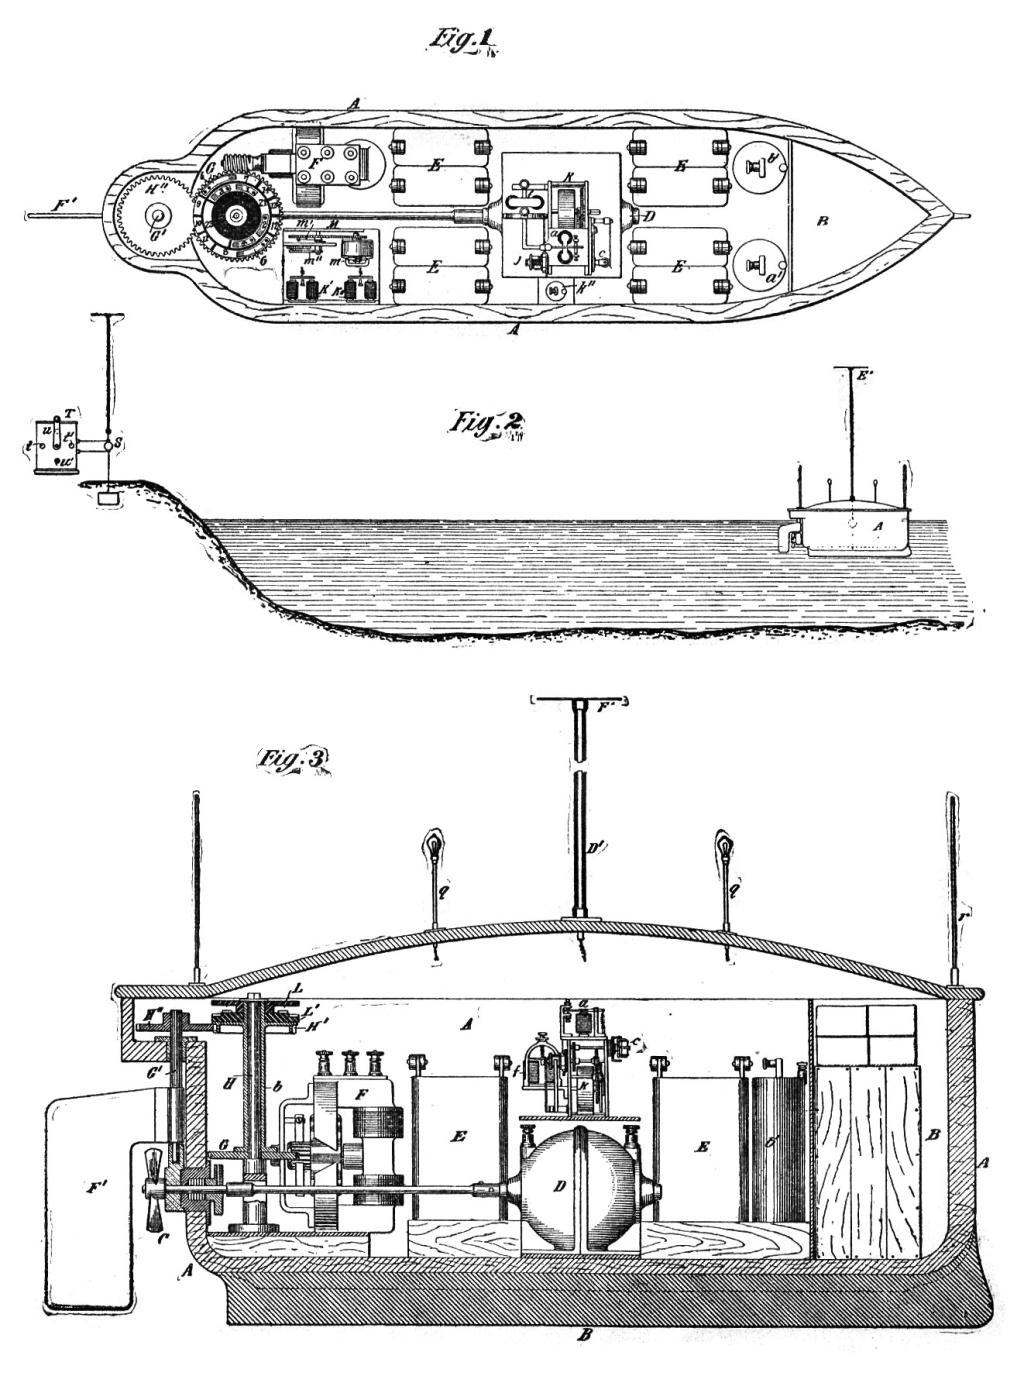 Patent drawing of Tesla's dirigible boat